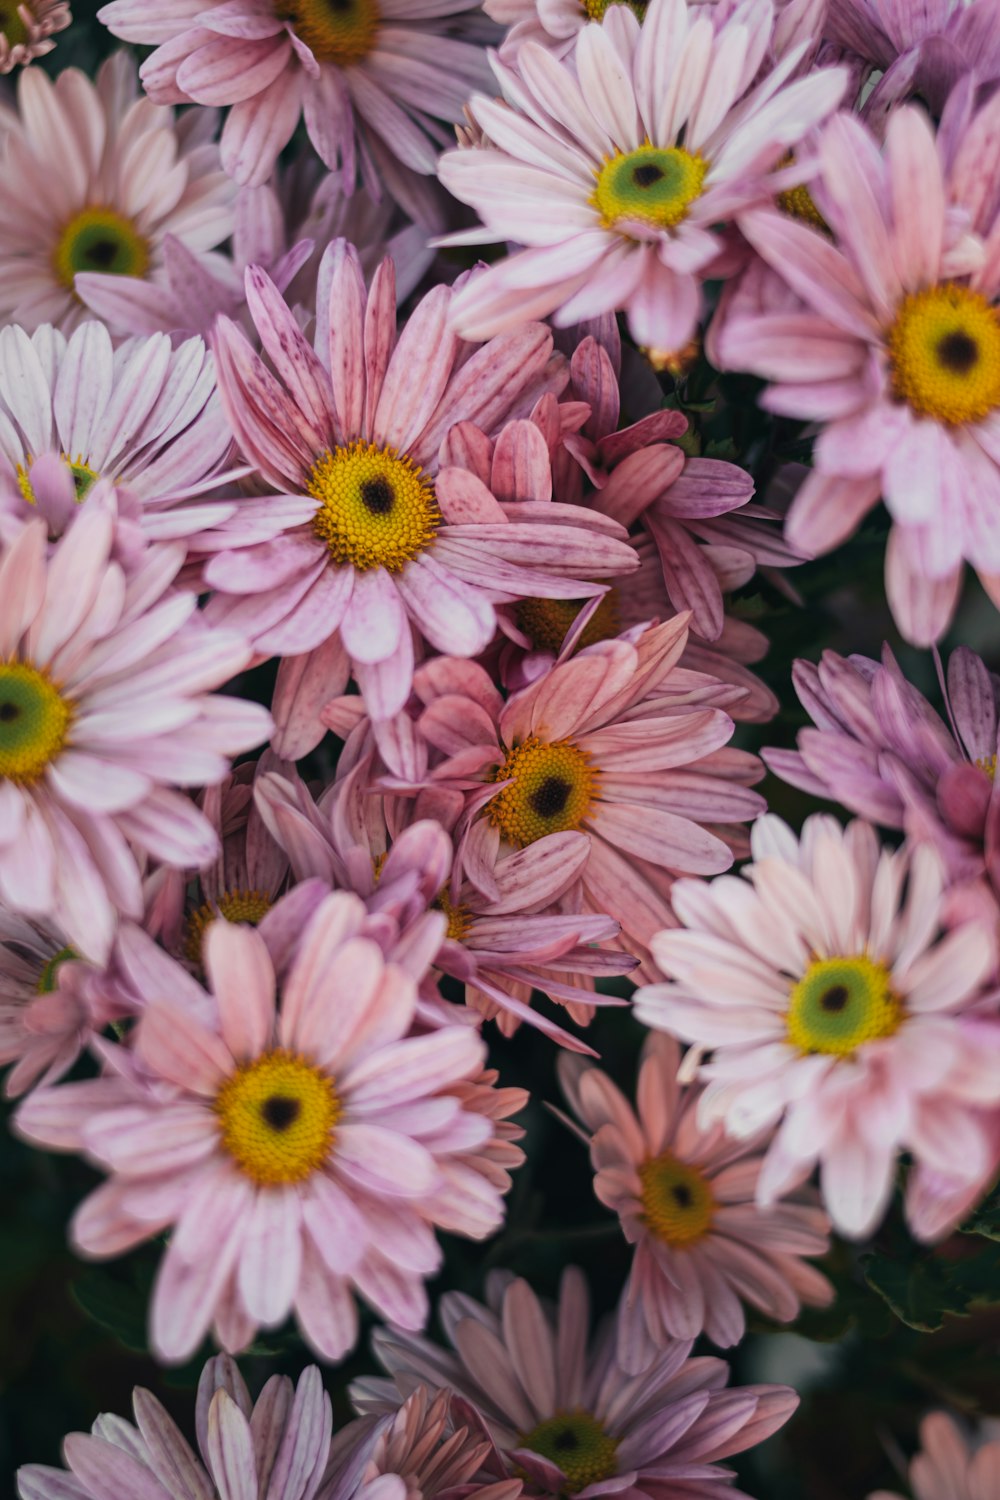 pink and white flowers in macro lens photo – Free Nature Image on Unsplash